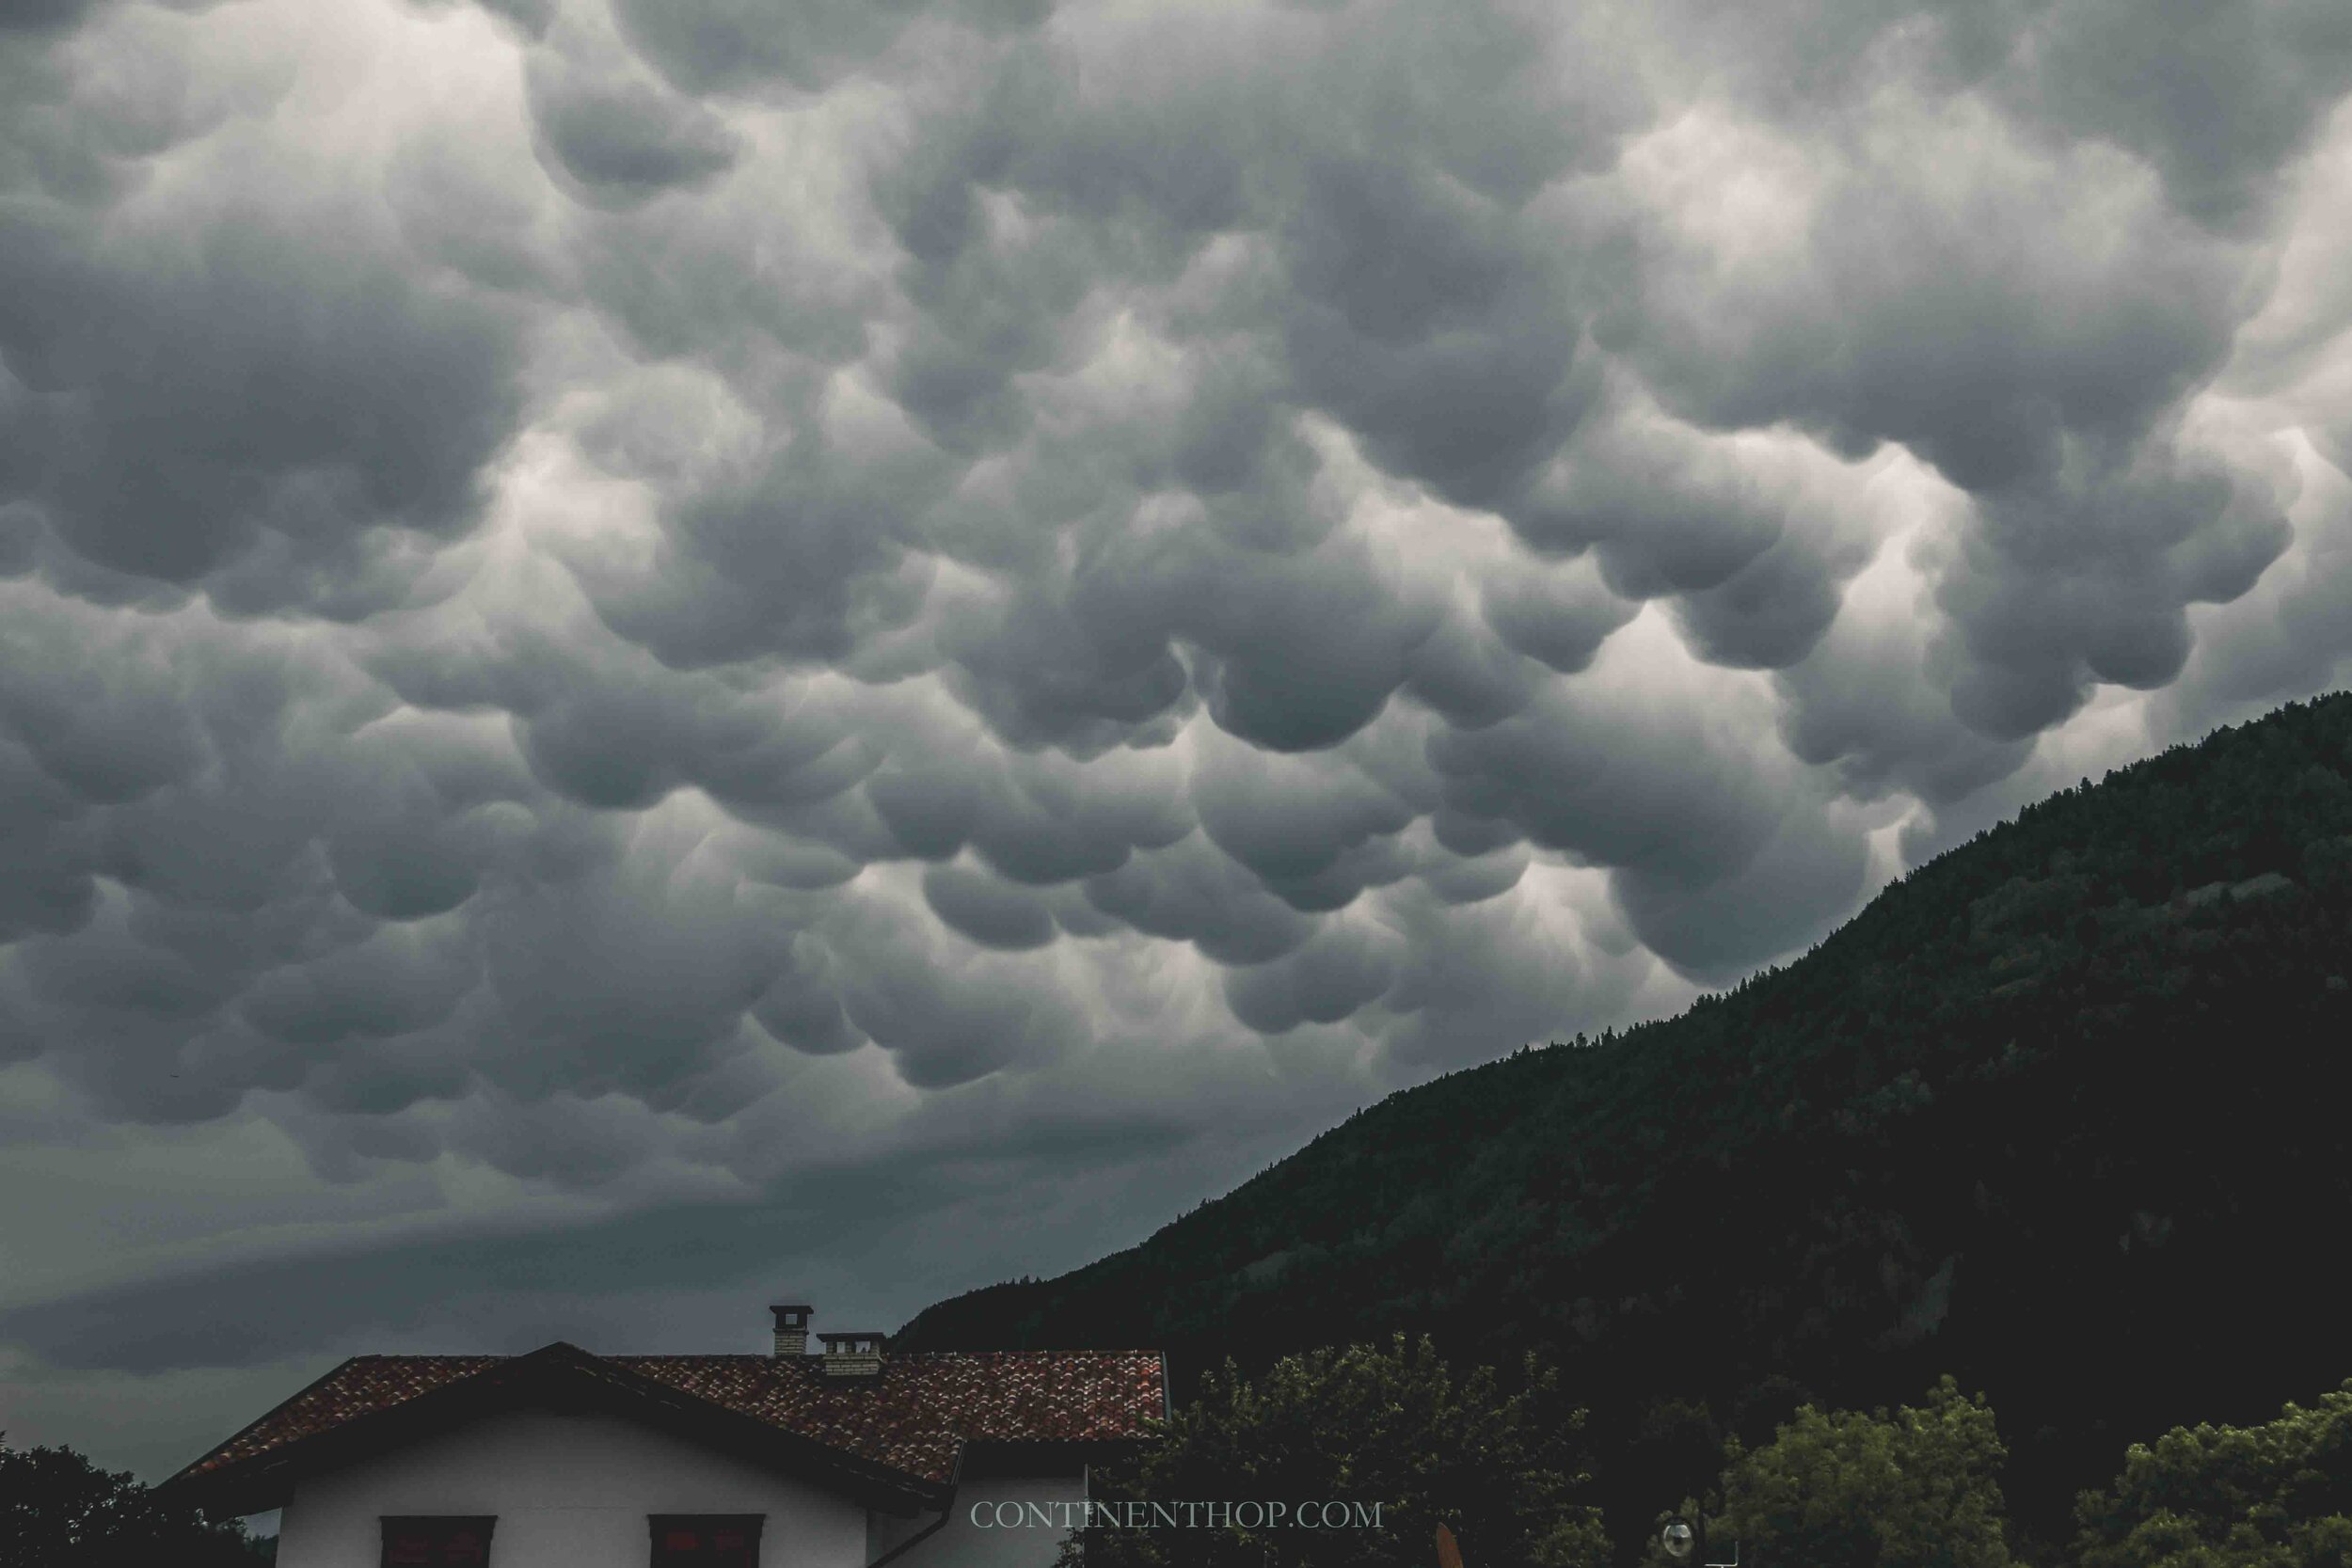 Mammatus clouds in the Cembra valley region in Italy